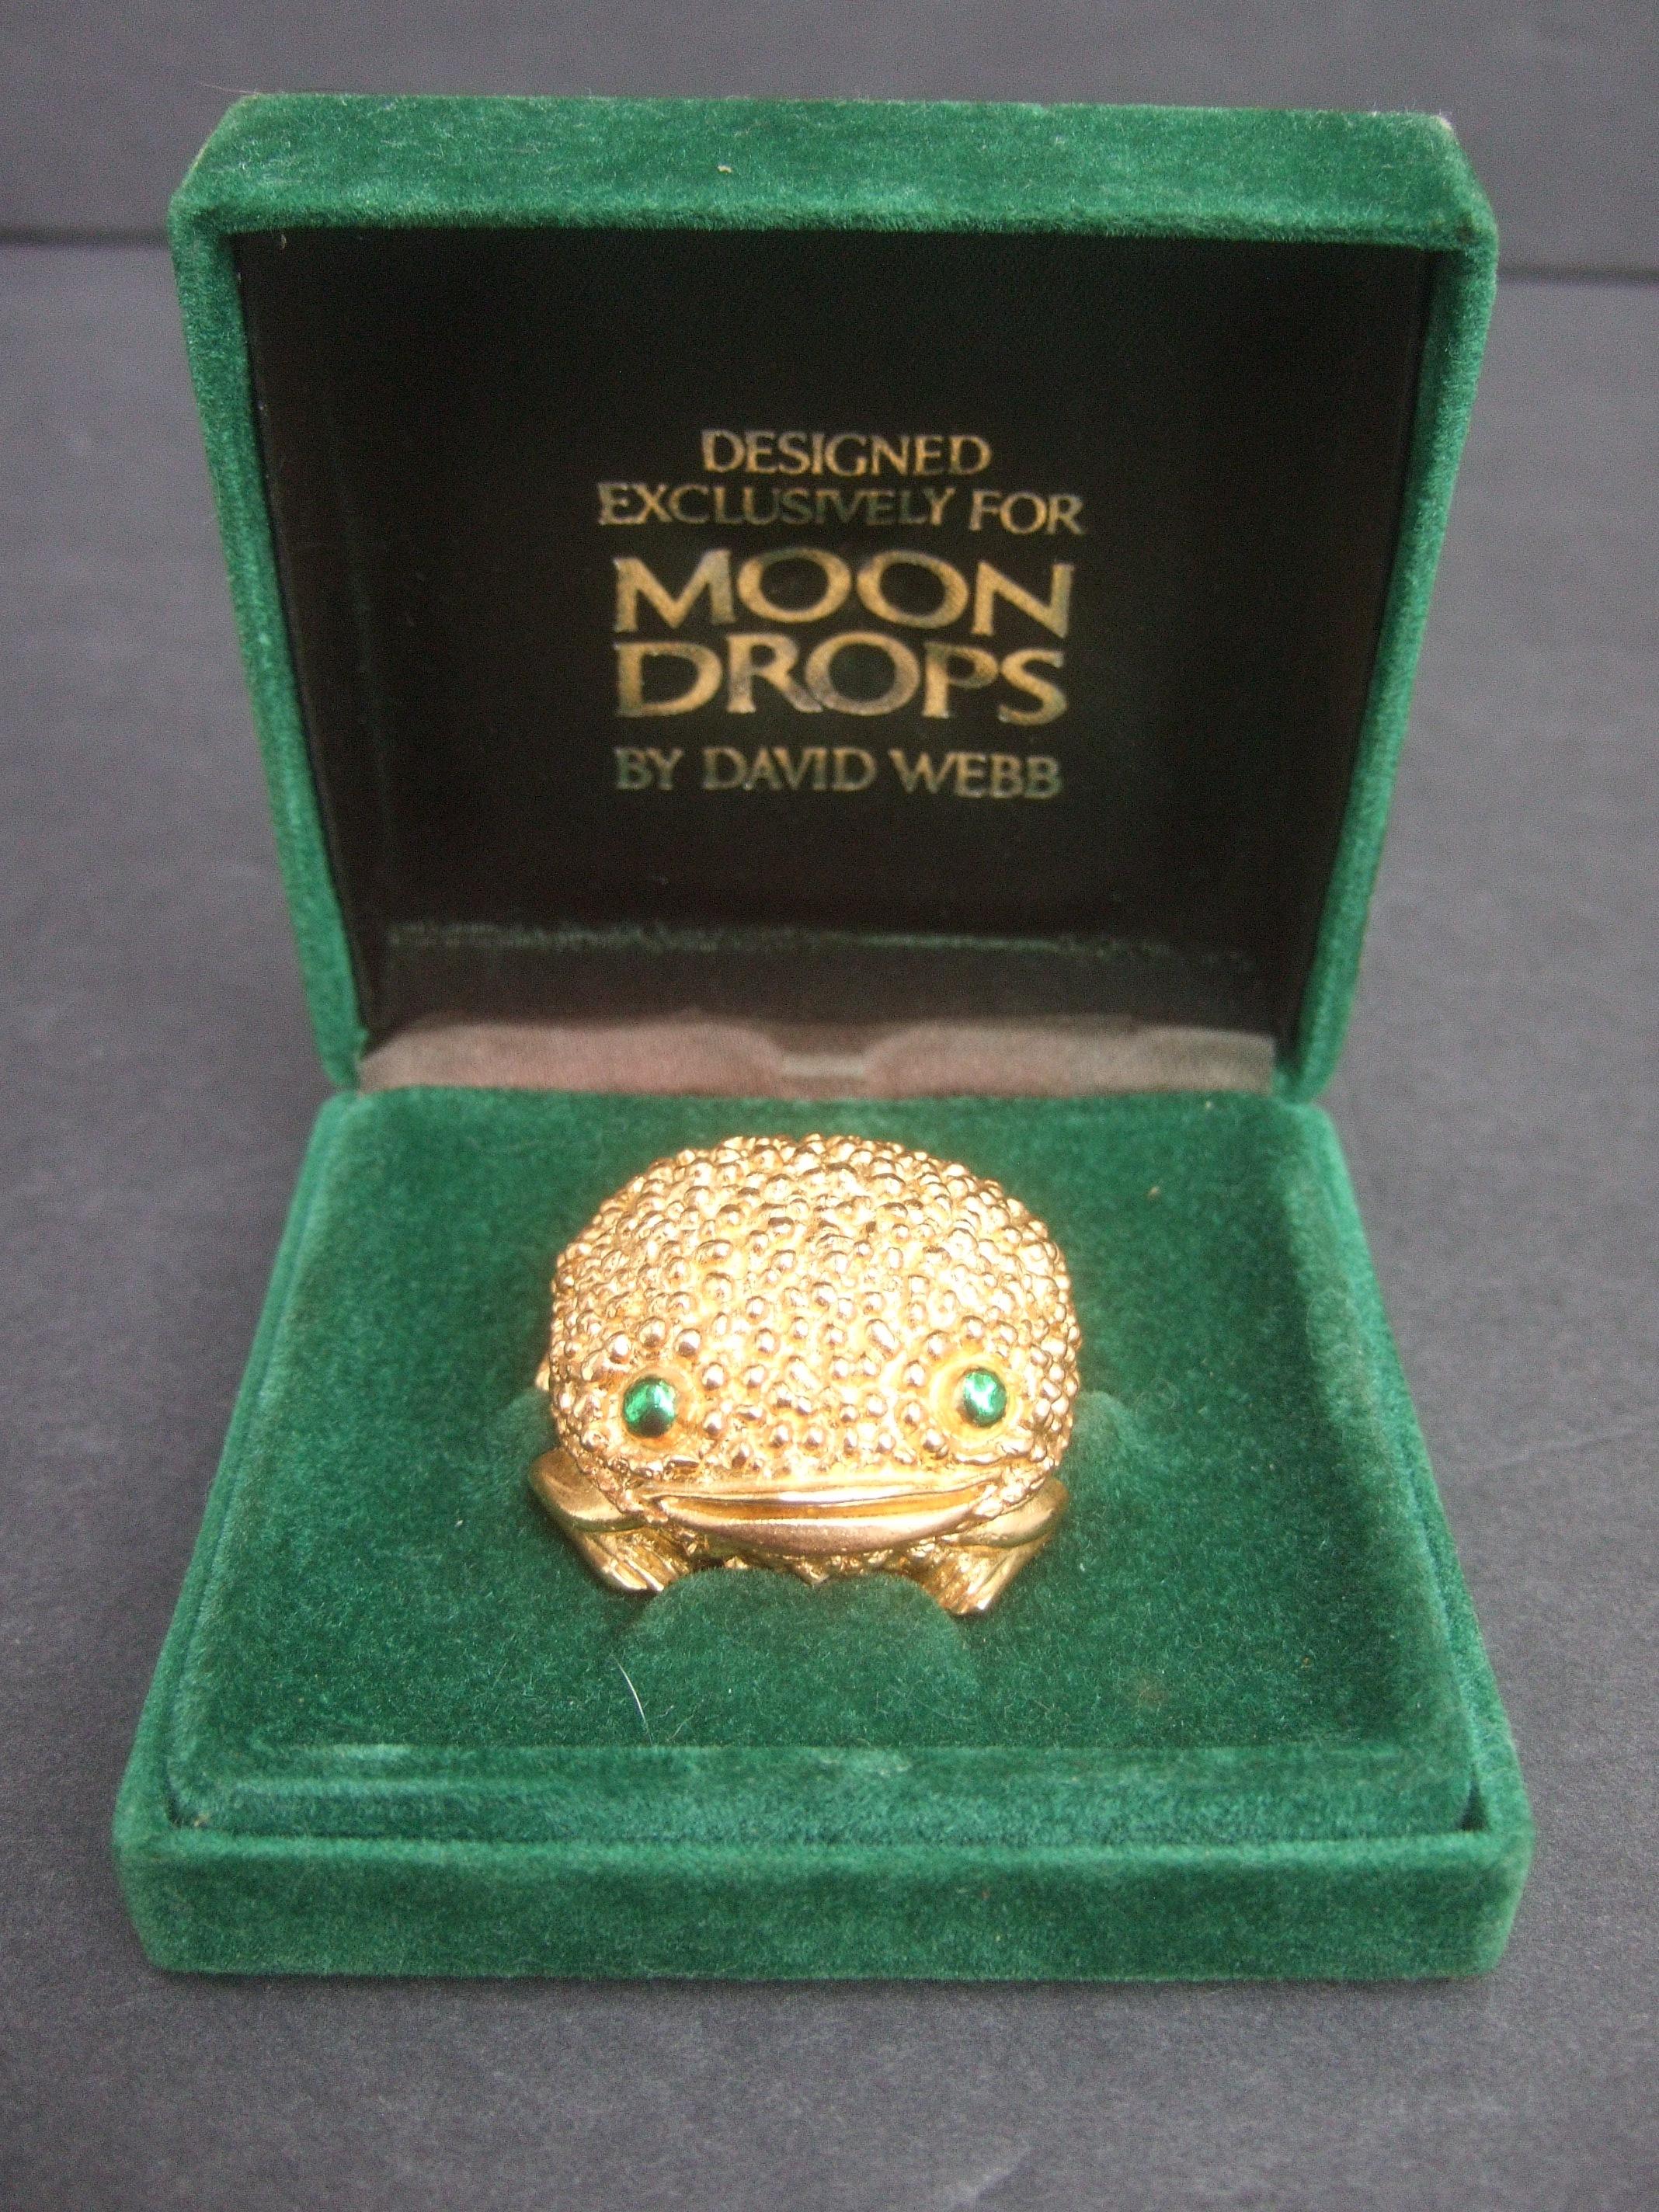 David Webb for Revlon costume frog wax perfume in the original presentation box c 1970
David Webb collaborated with Revlon & created a collection of endearing costume 
gilt metal animal creatures promoting Revlon's wax perfume fragrances from the